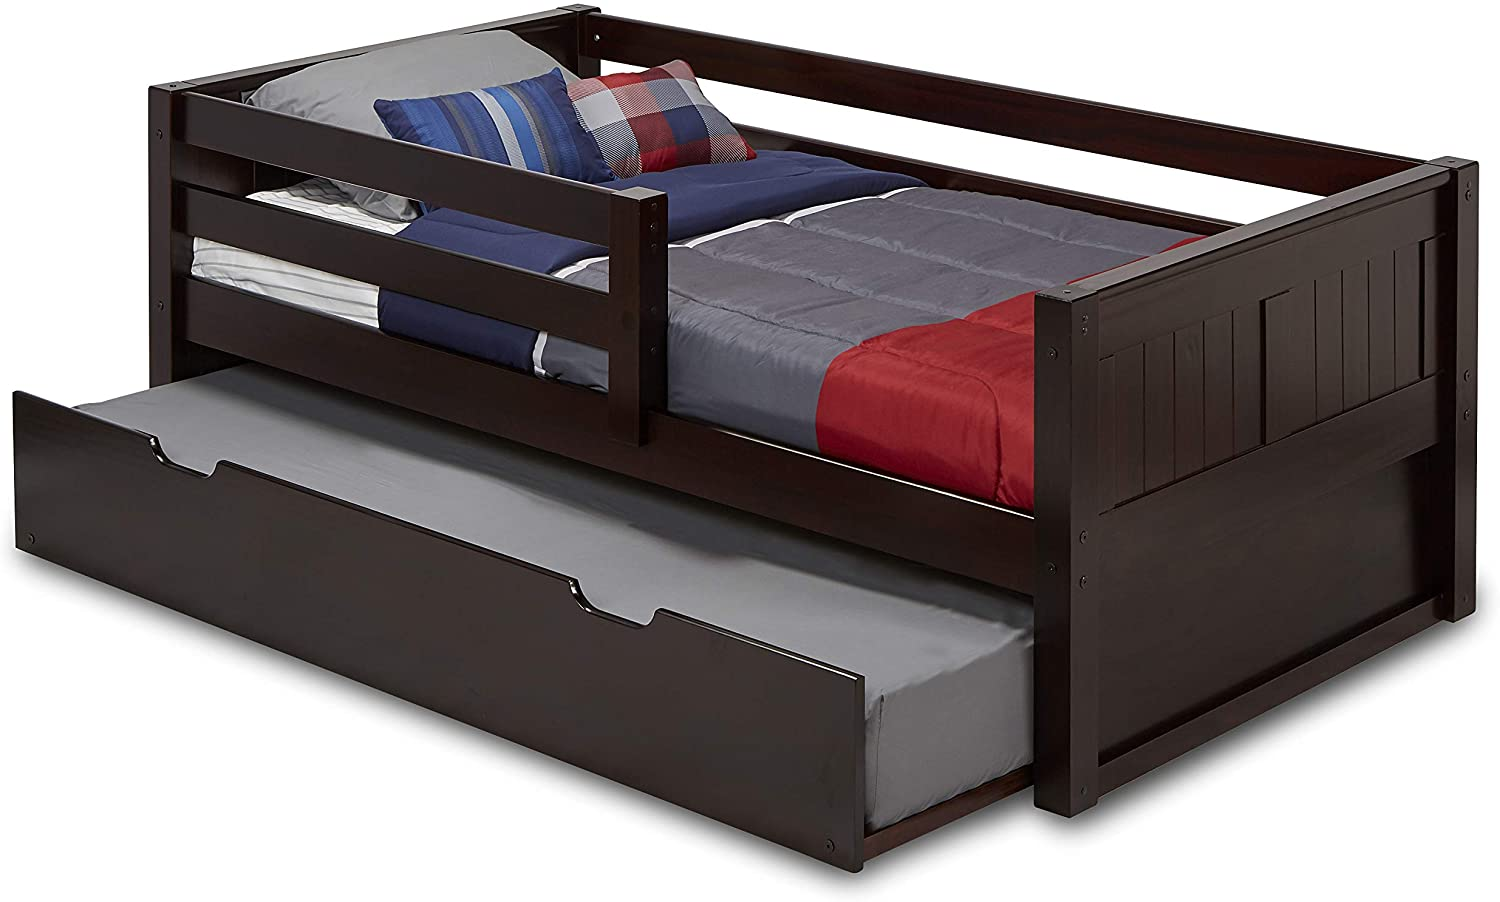 Choose a slide out bed frame like this for a room shared by kids.